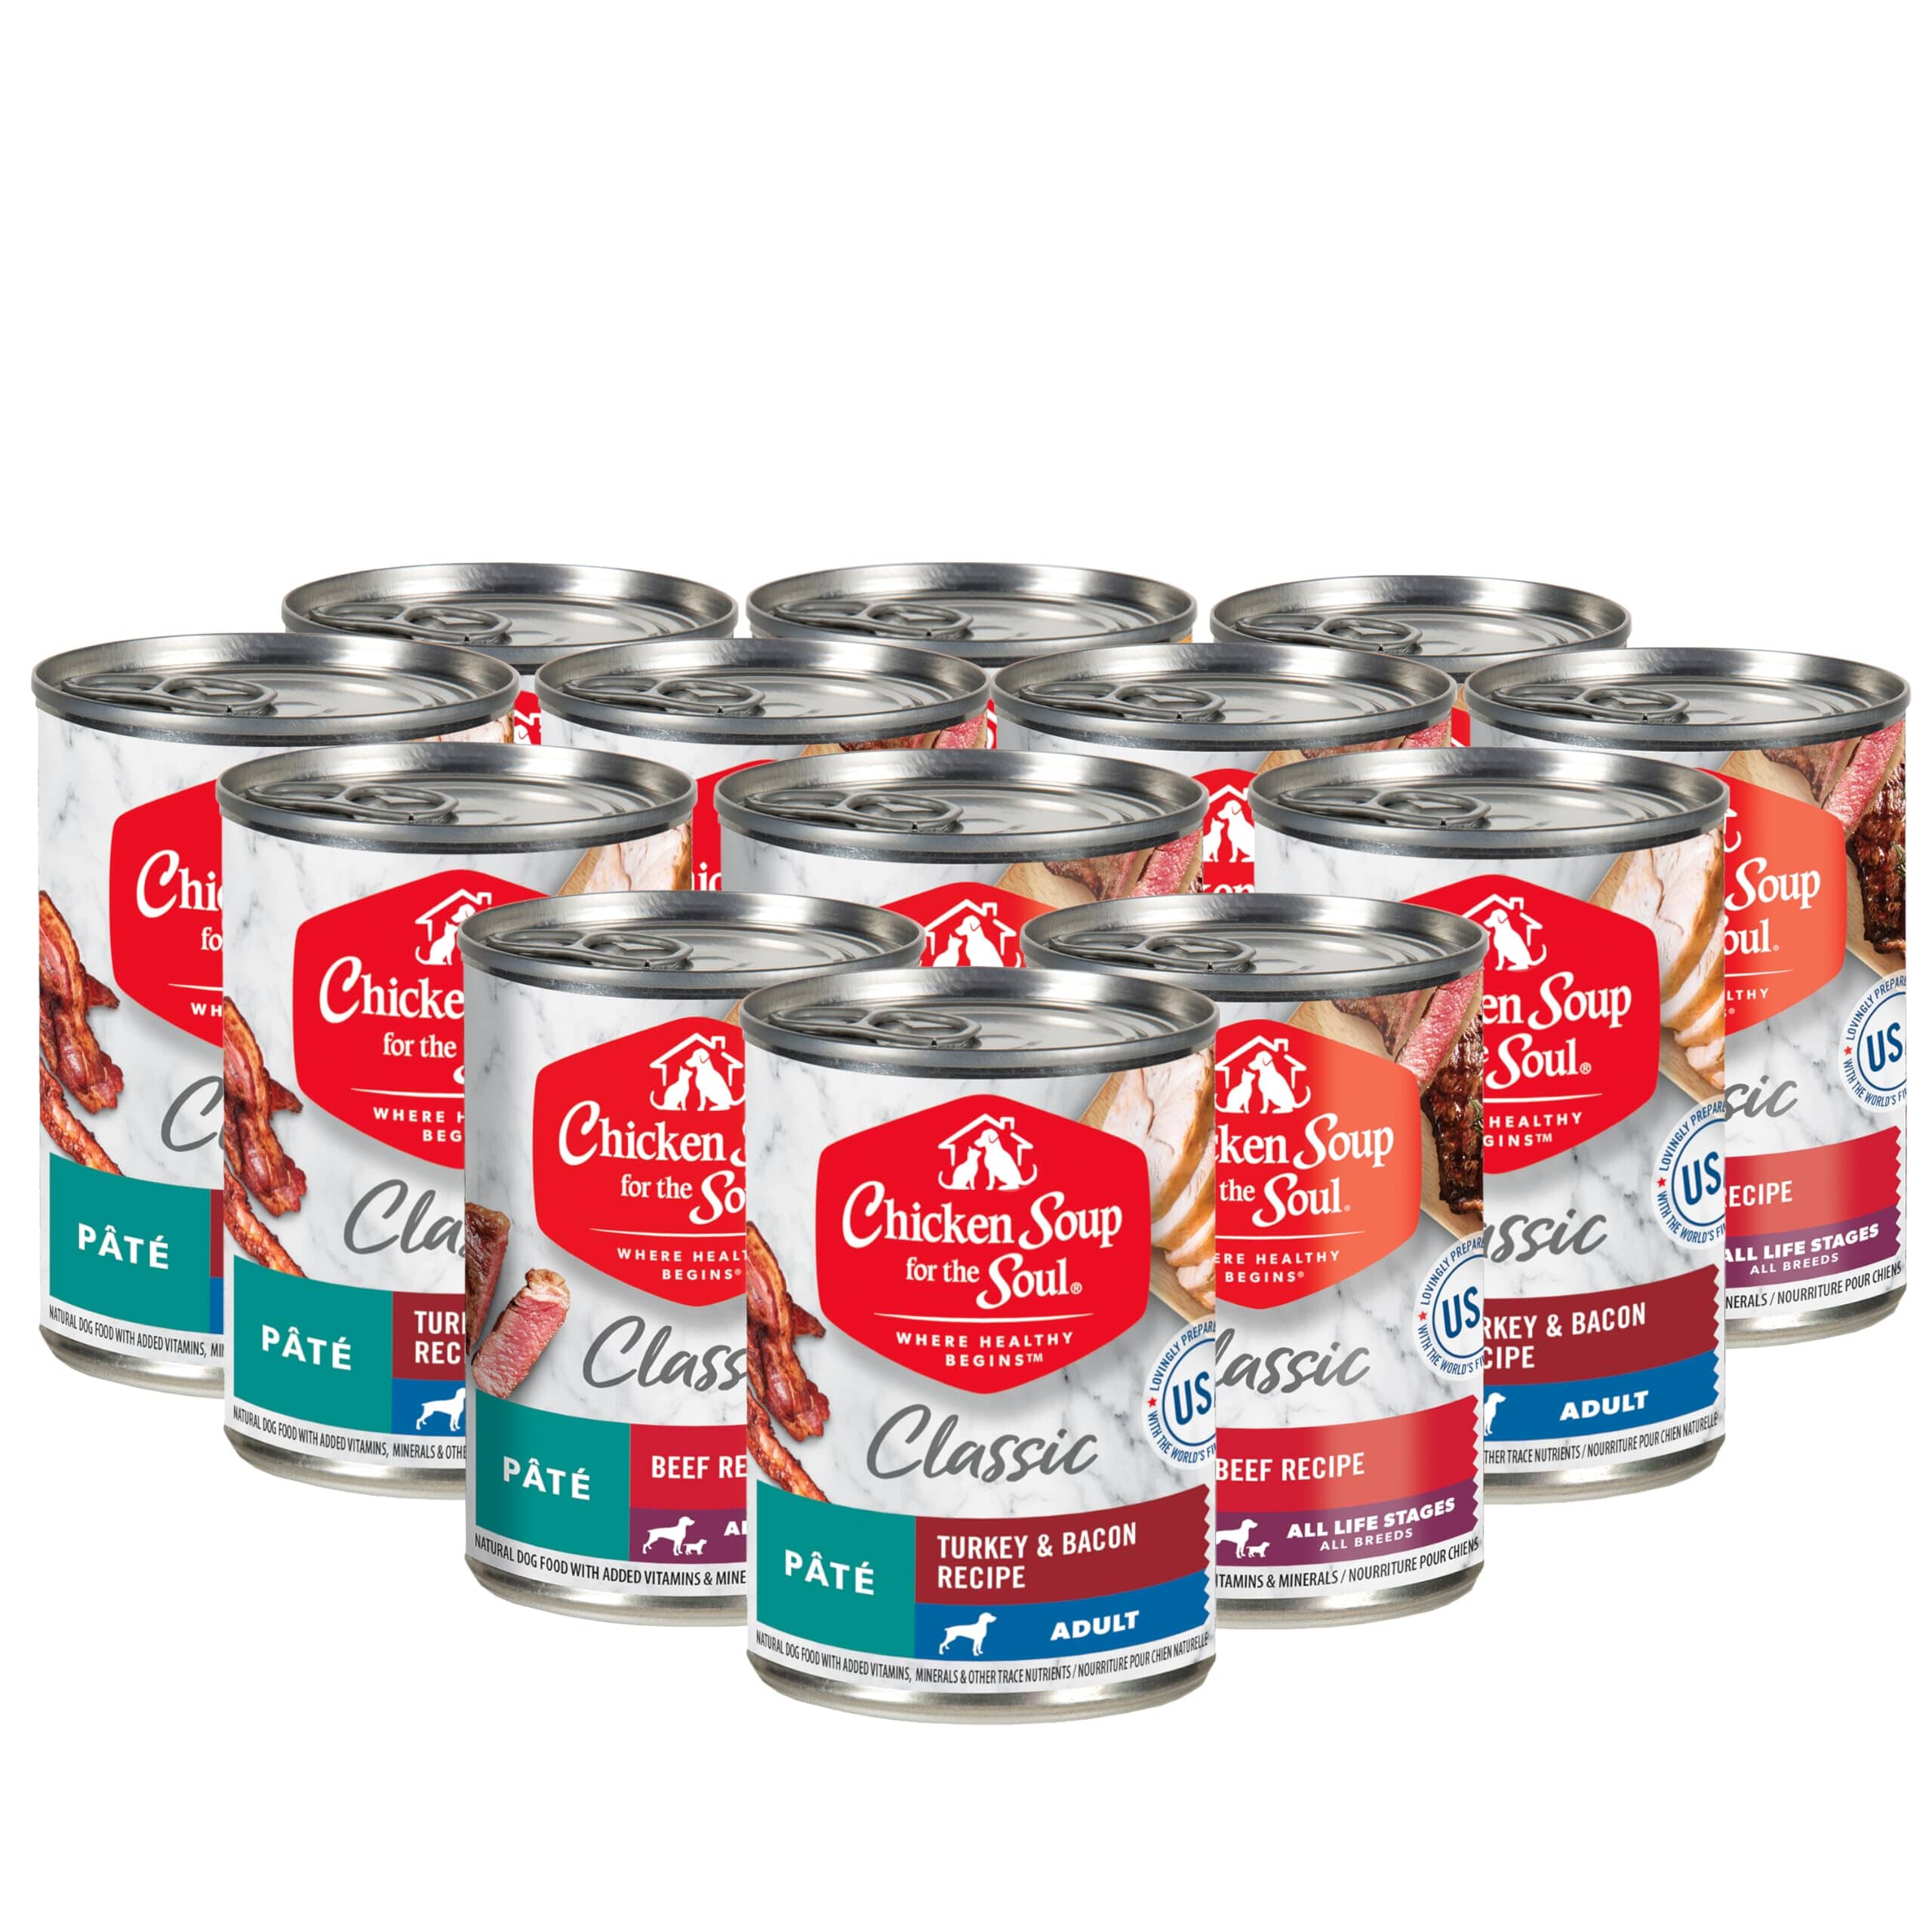 Chicken Soup for the Soul Turkey and Bacon Canned Dog Food - 13 Oz - Case of 12  